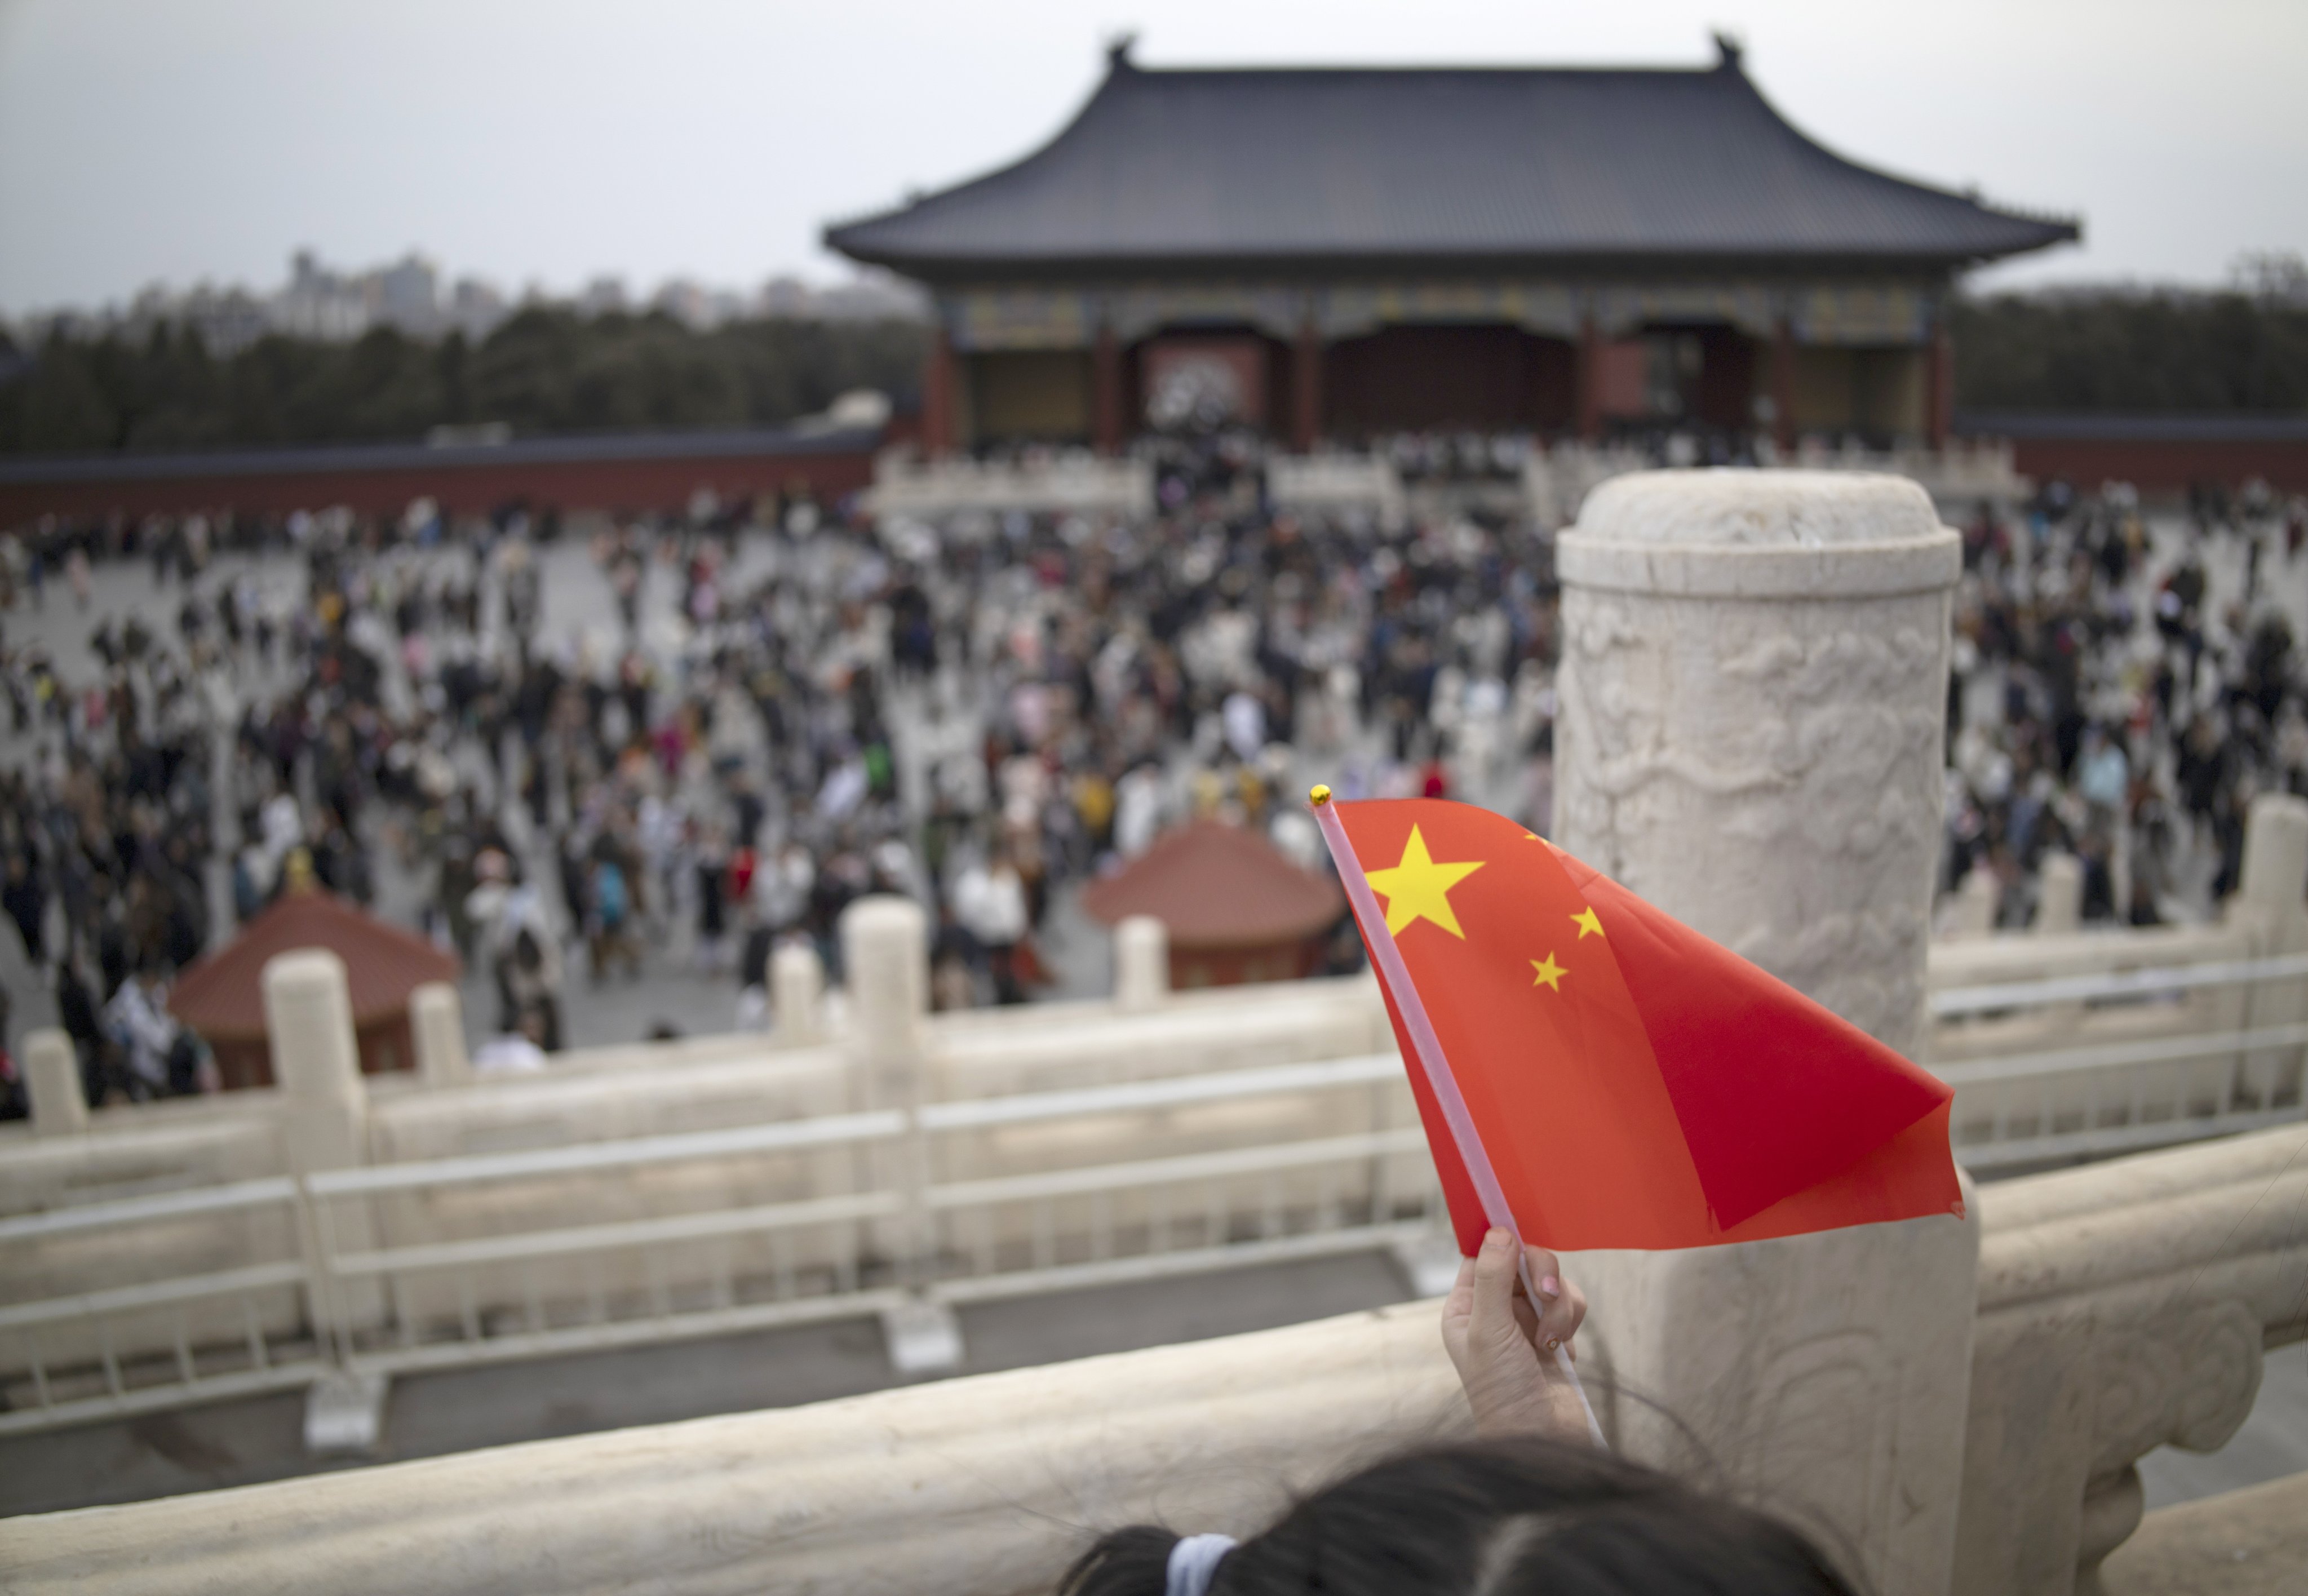 A girl holds a Chinese flag at the Temple of Heaven during Lunar New Year celebrations in Beijing on February 14. The US policy elite’s fantasy about the “democratisation of China” has taken root since the early days of Chinese reforms. Photo: EPA-EFE